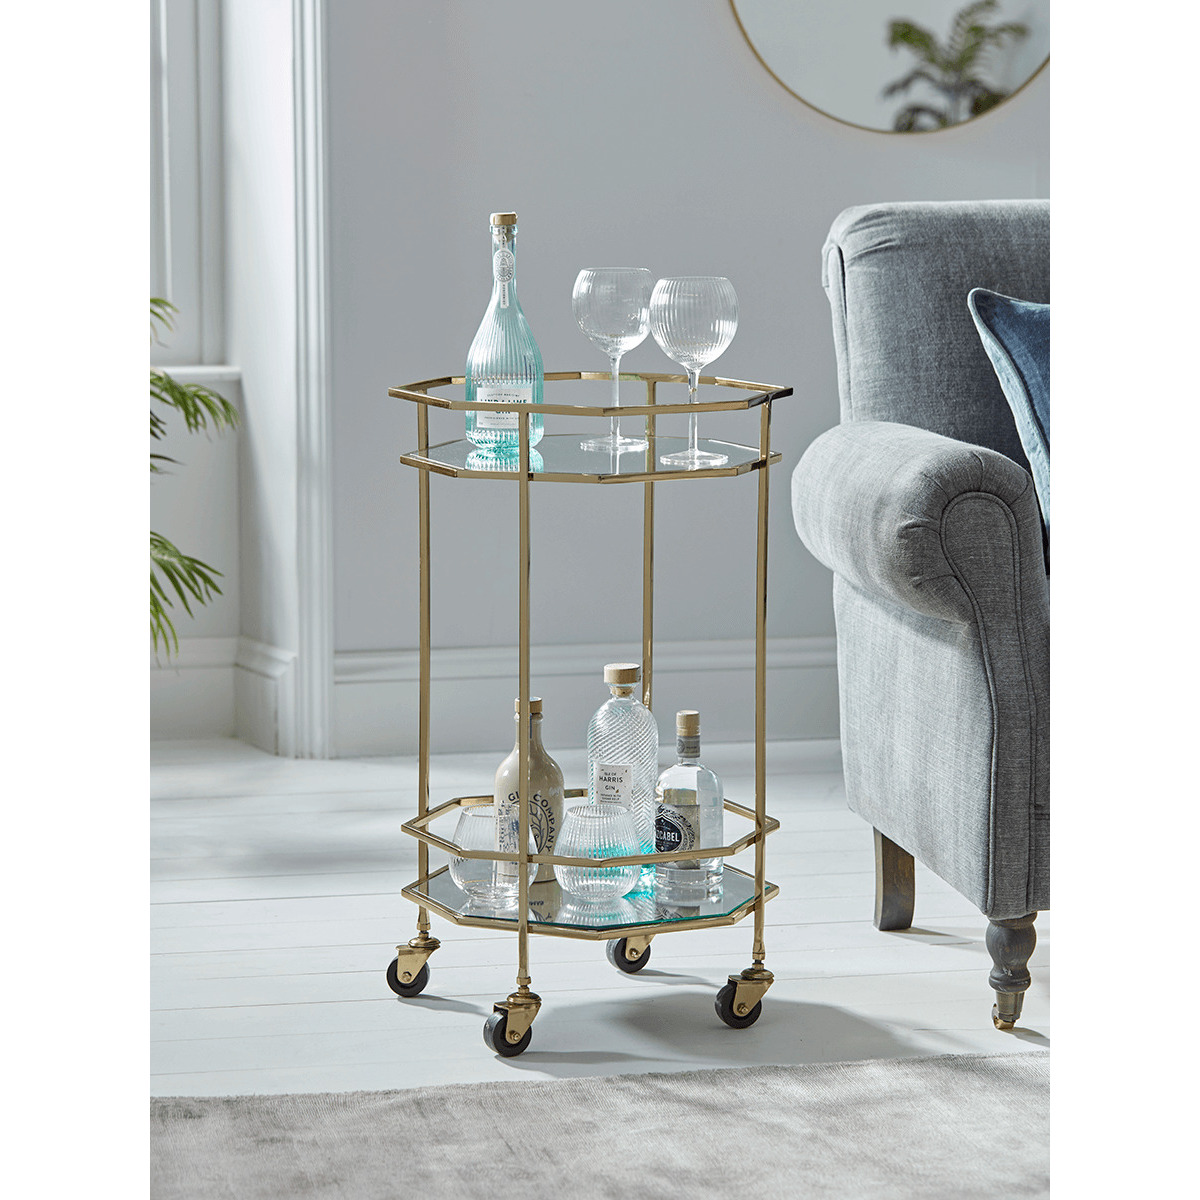 Octagonal Drinks Trolley - Gold - image 1